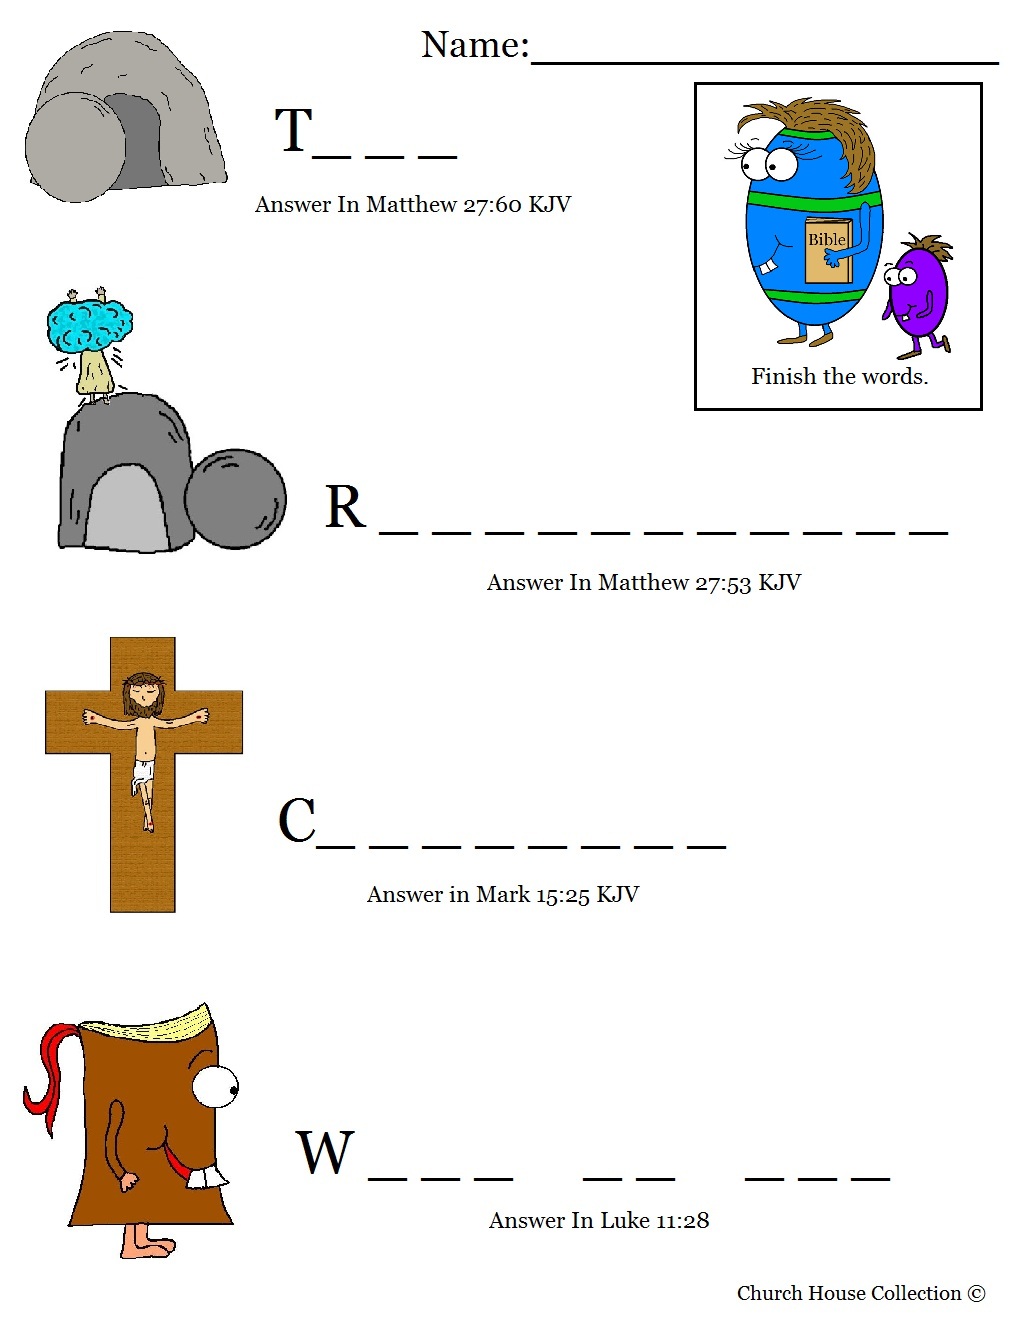 Easter Egg With Bible Fill In The Blanks Worksheet For Sunday School